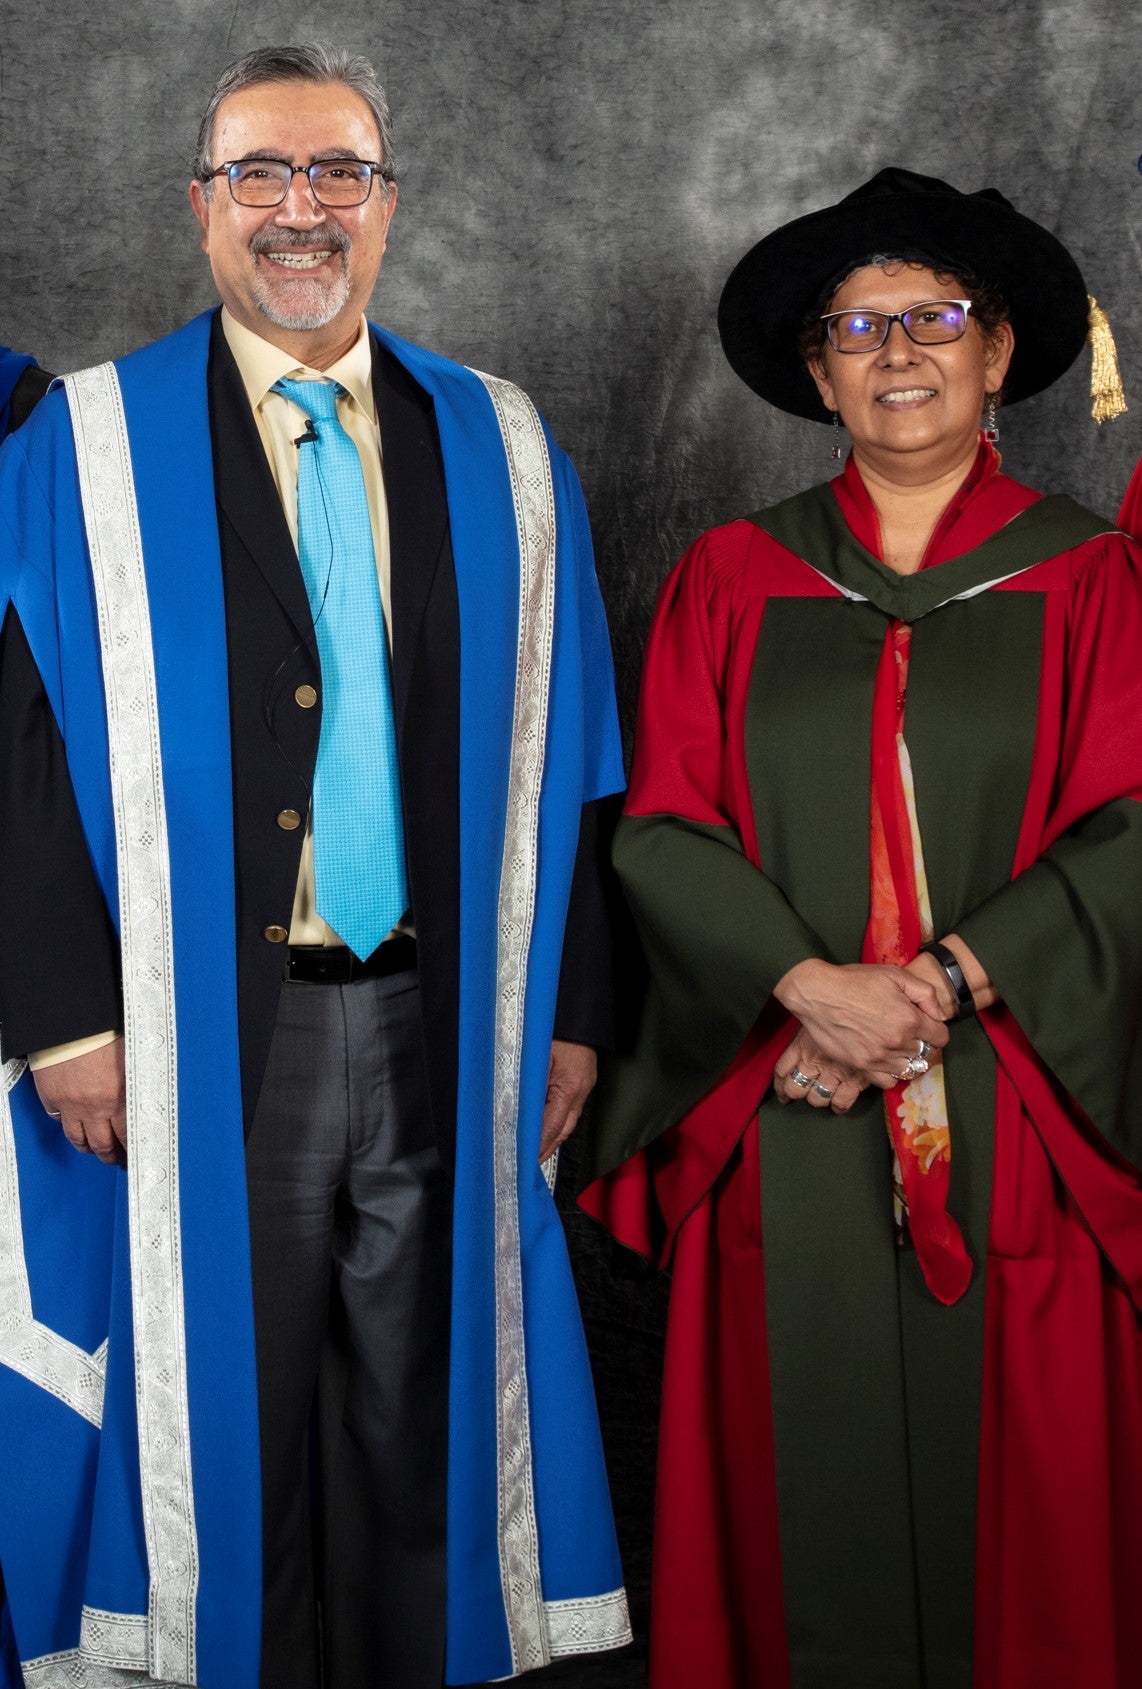 Feridun and Charmaine at convocation